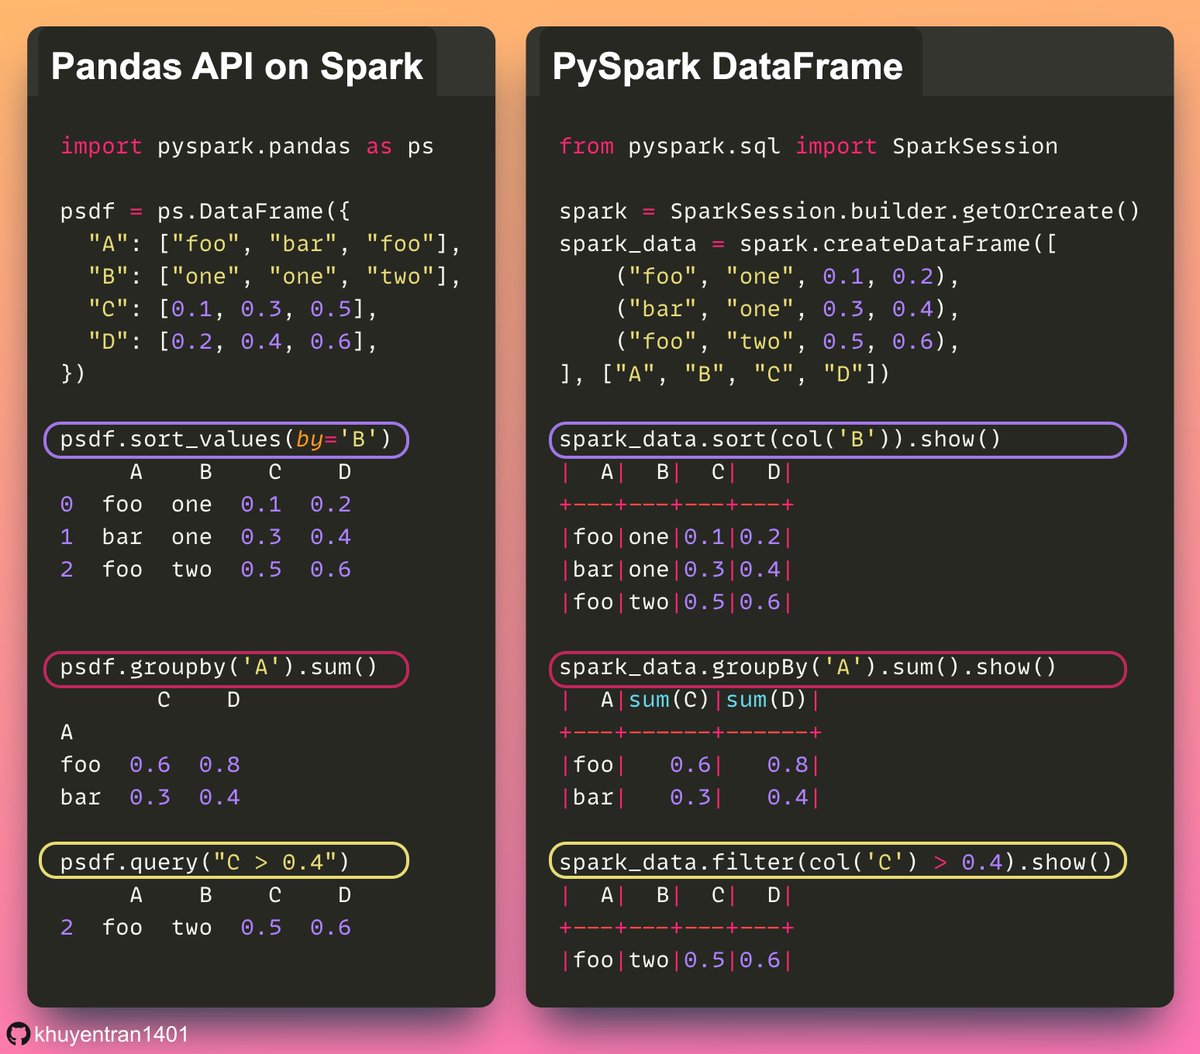 Spark enables scaling of your pandas workloads across multiple nodes. However, learning PySpark syntax can be daunting for pandas users.

Pandas API on Spark enables leveraging Spark's capabilities for big data while retaining a familiar pandas-like syntax.

#apachespark #pandas